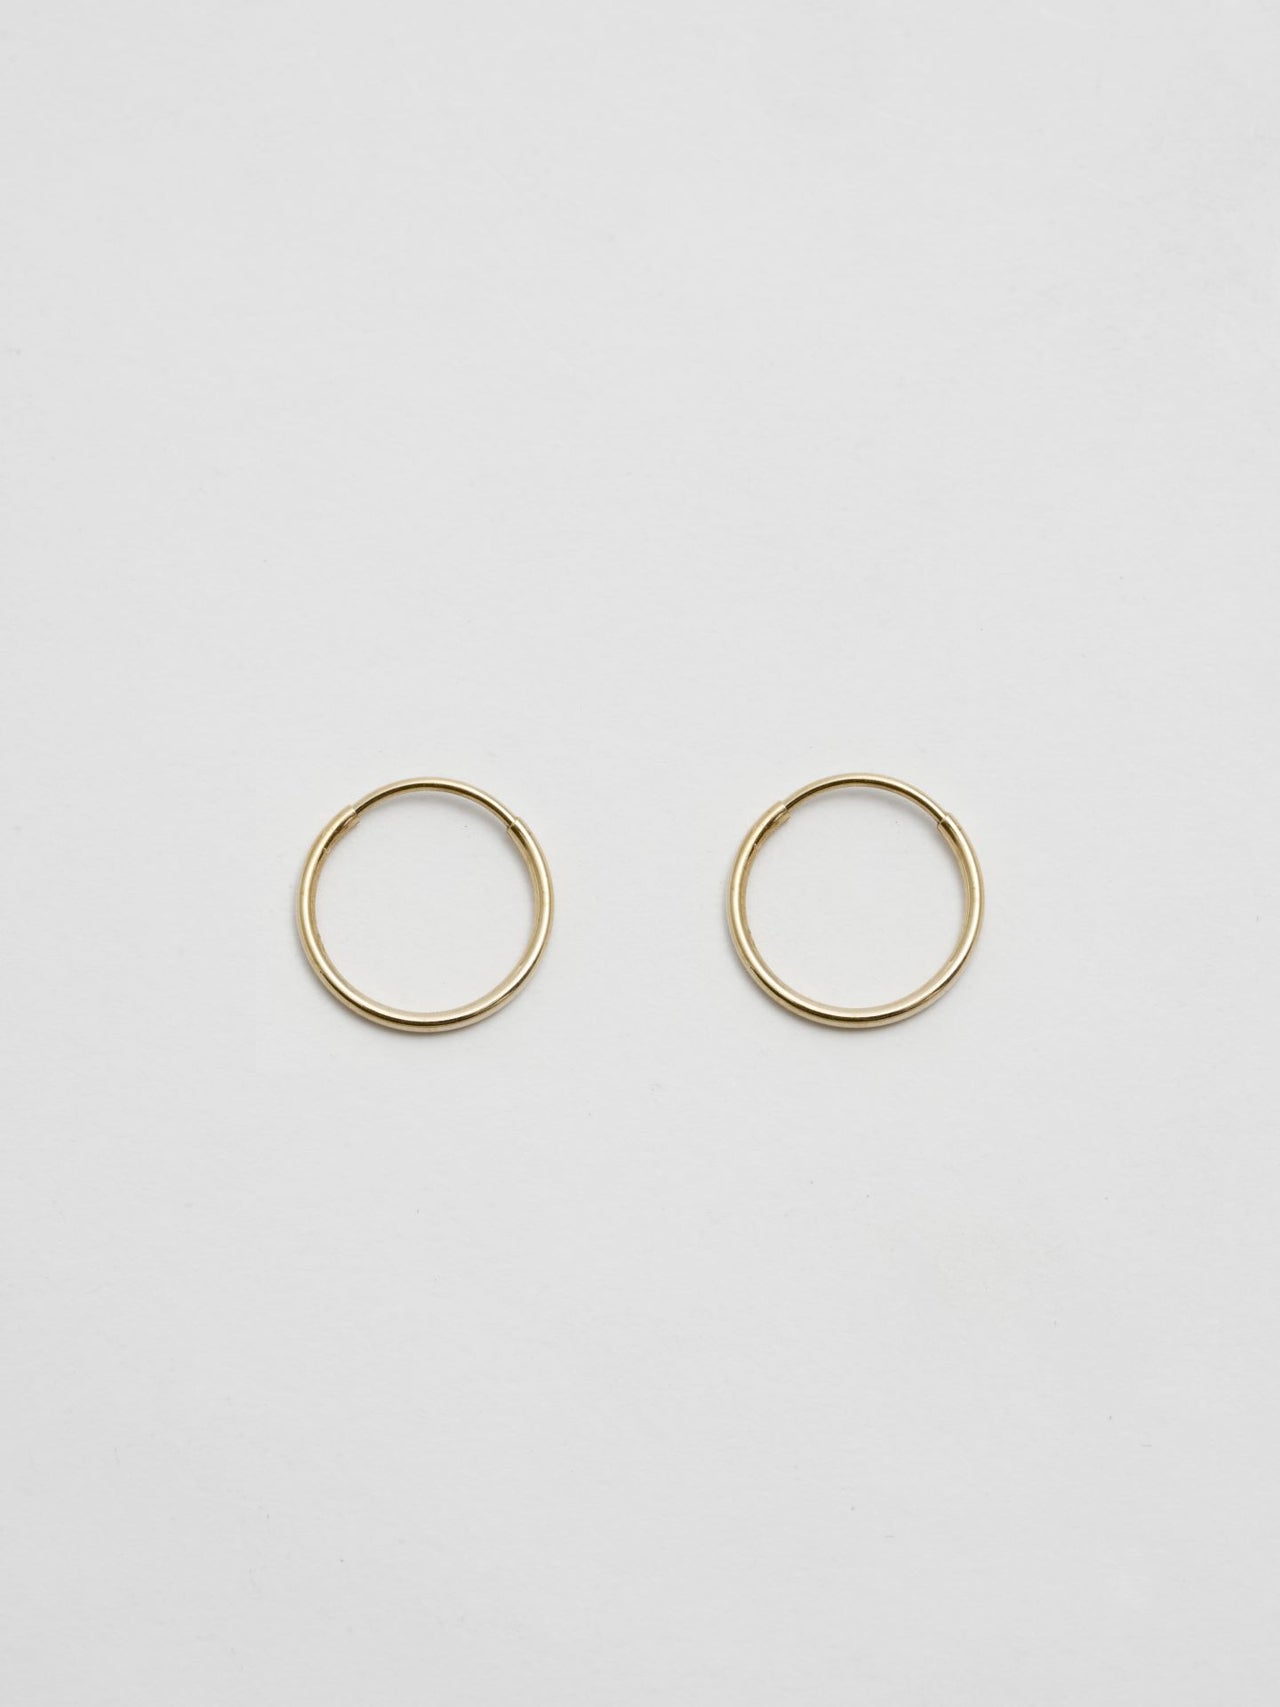 Front product shot of the Mini Infinity Hoops (14Kt shiny Yellow Gold Hoop Earrings  Diameter: 0.75”) Background: Grey backdrop